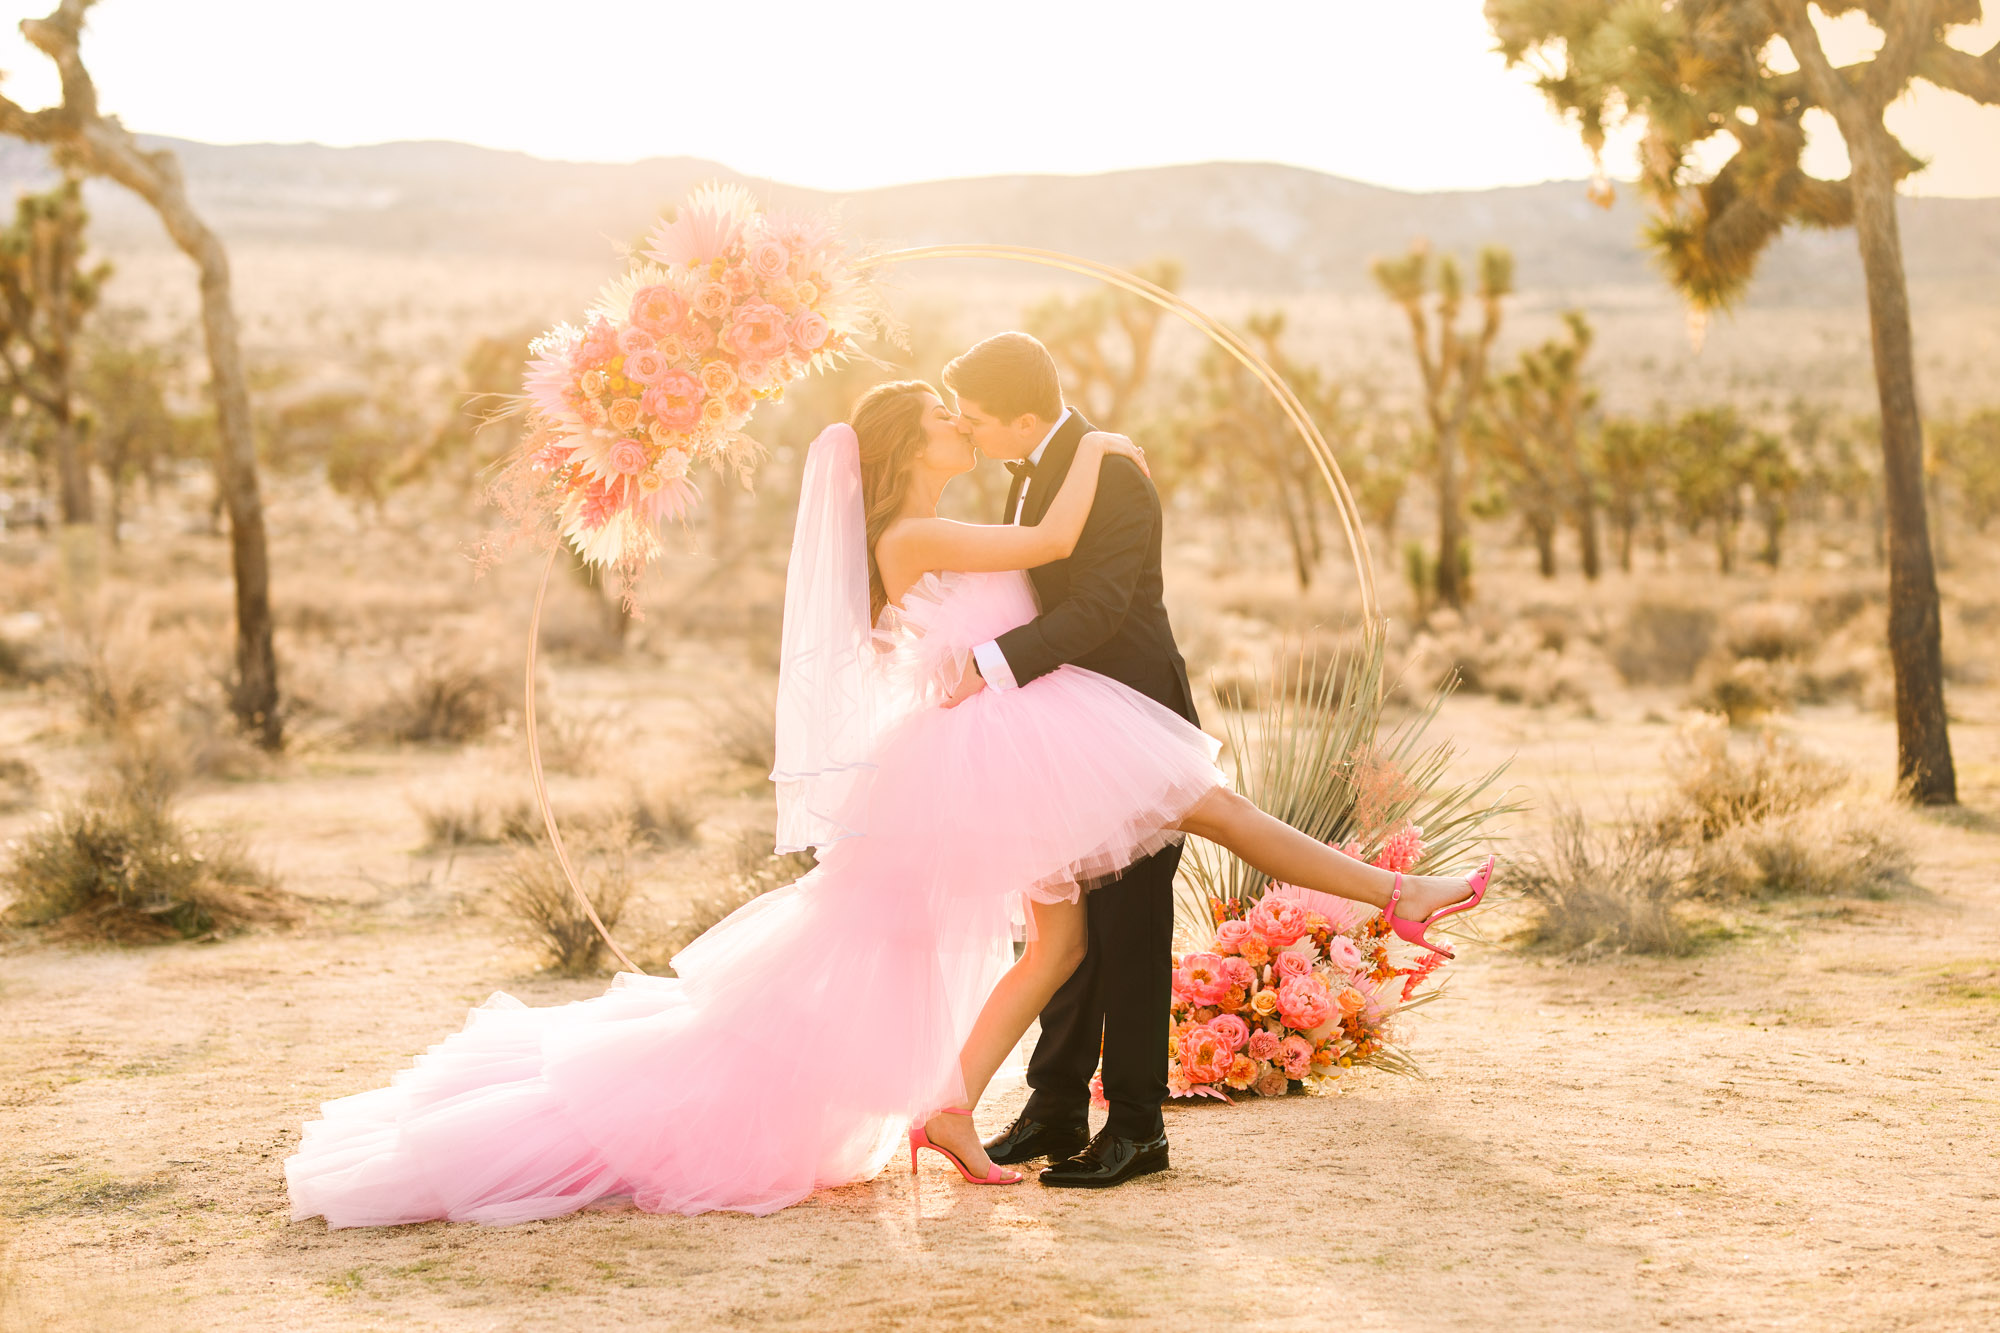 Bride and groom kissing in front of floral circular ceremony arch | Pink wedding dress Joshua Tree elopement featured on Green Wedding Shoes | Colorful desert wedding inspiration for fun-loving couples in Southern California #joshuatreewedding #joshuatreeelopement #pinkwedding #greenweddingshoes Source: Mary Costa Photography | Los Angeles